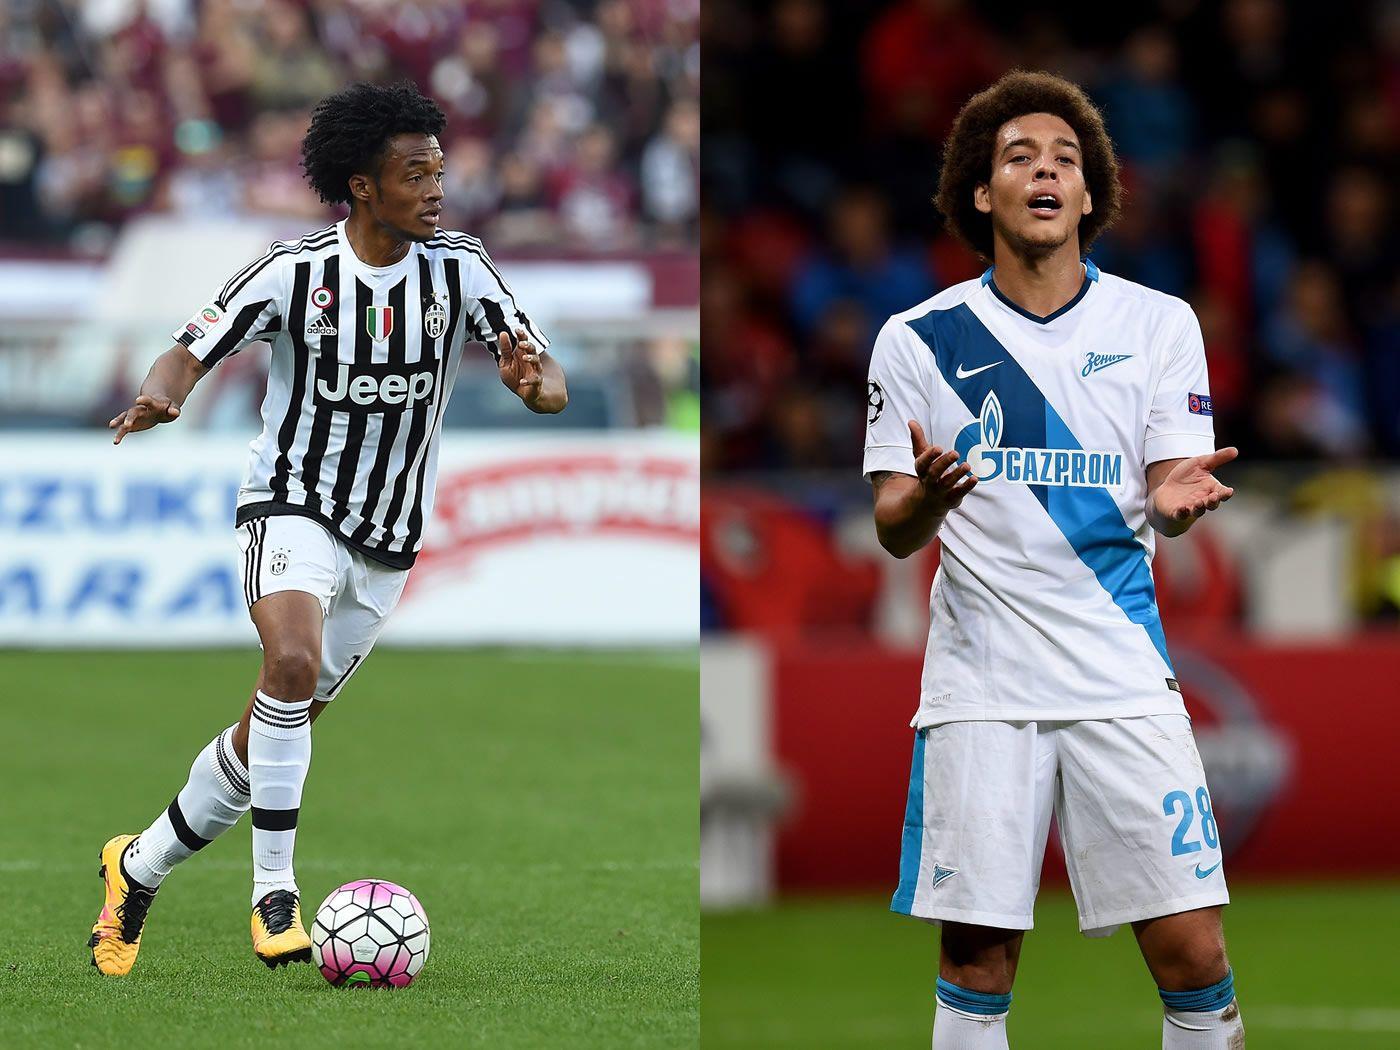 Breaking, Juventus complete deals for Axel Witsel and Juan